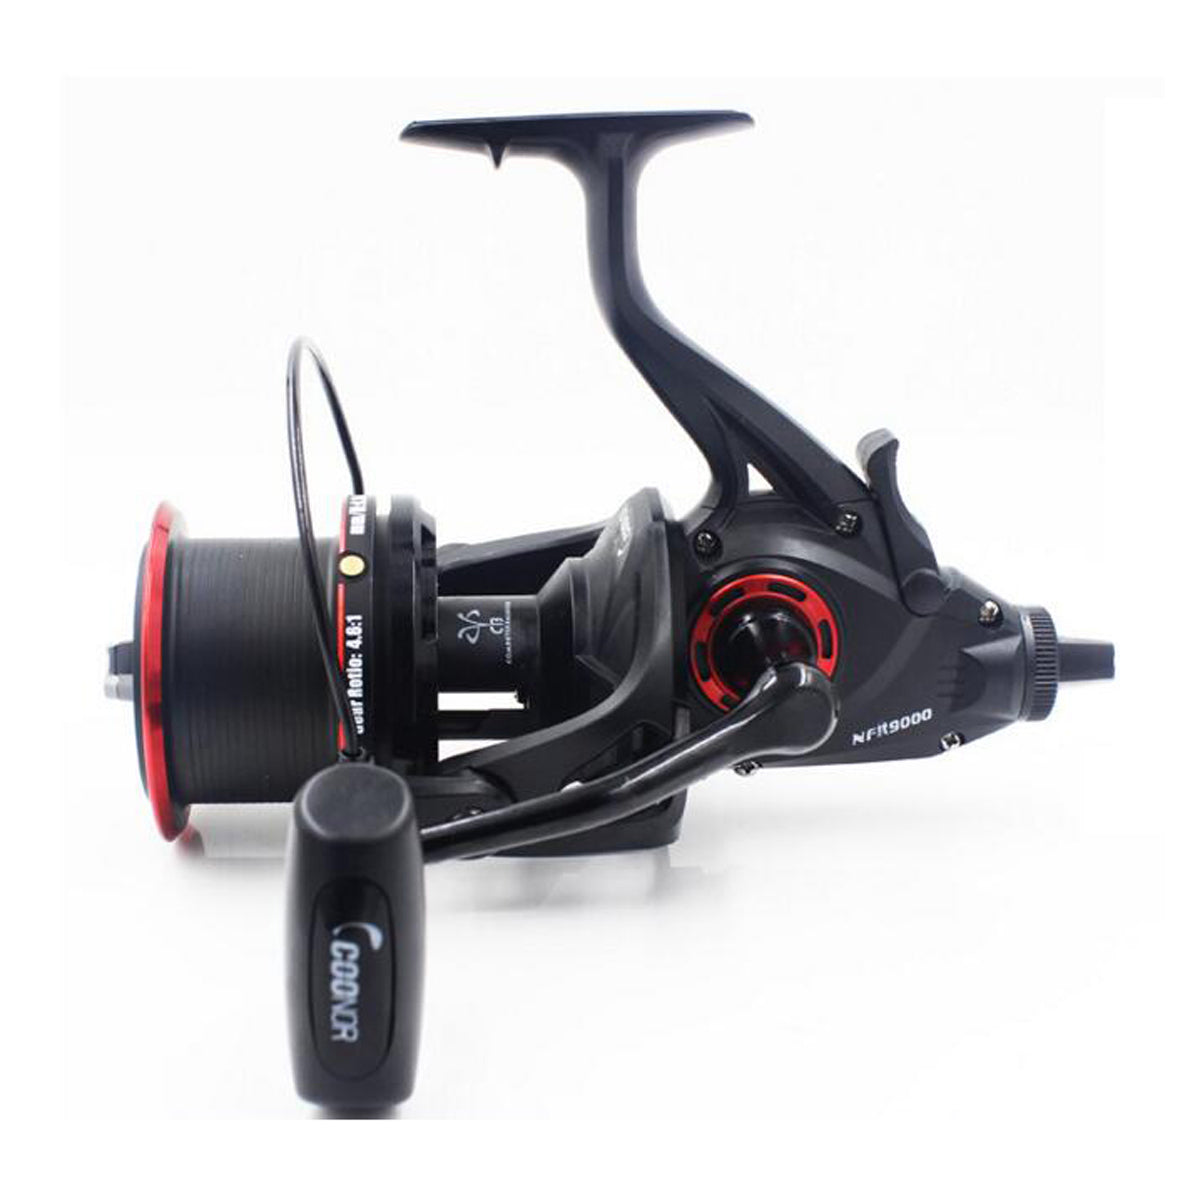 Bobing Coonor NFR9000 12+1BB 4.6:1 Double Unloading Spinning Fishing Reel All Metal Saltwater Wheel